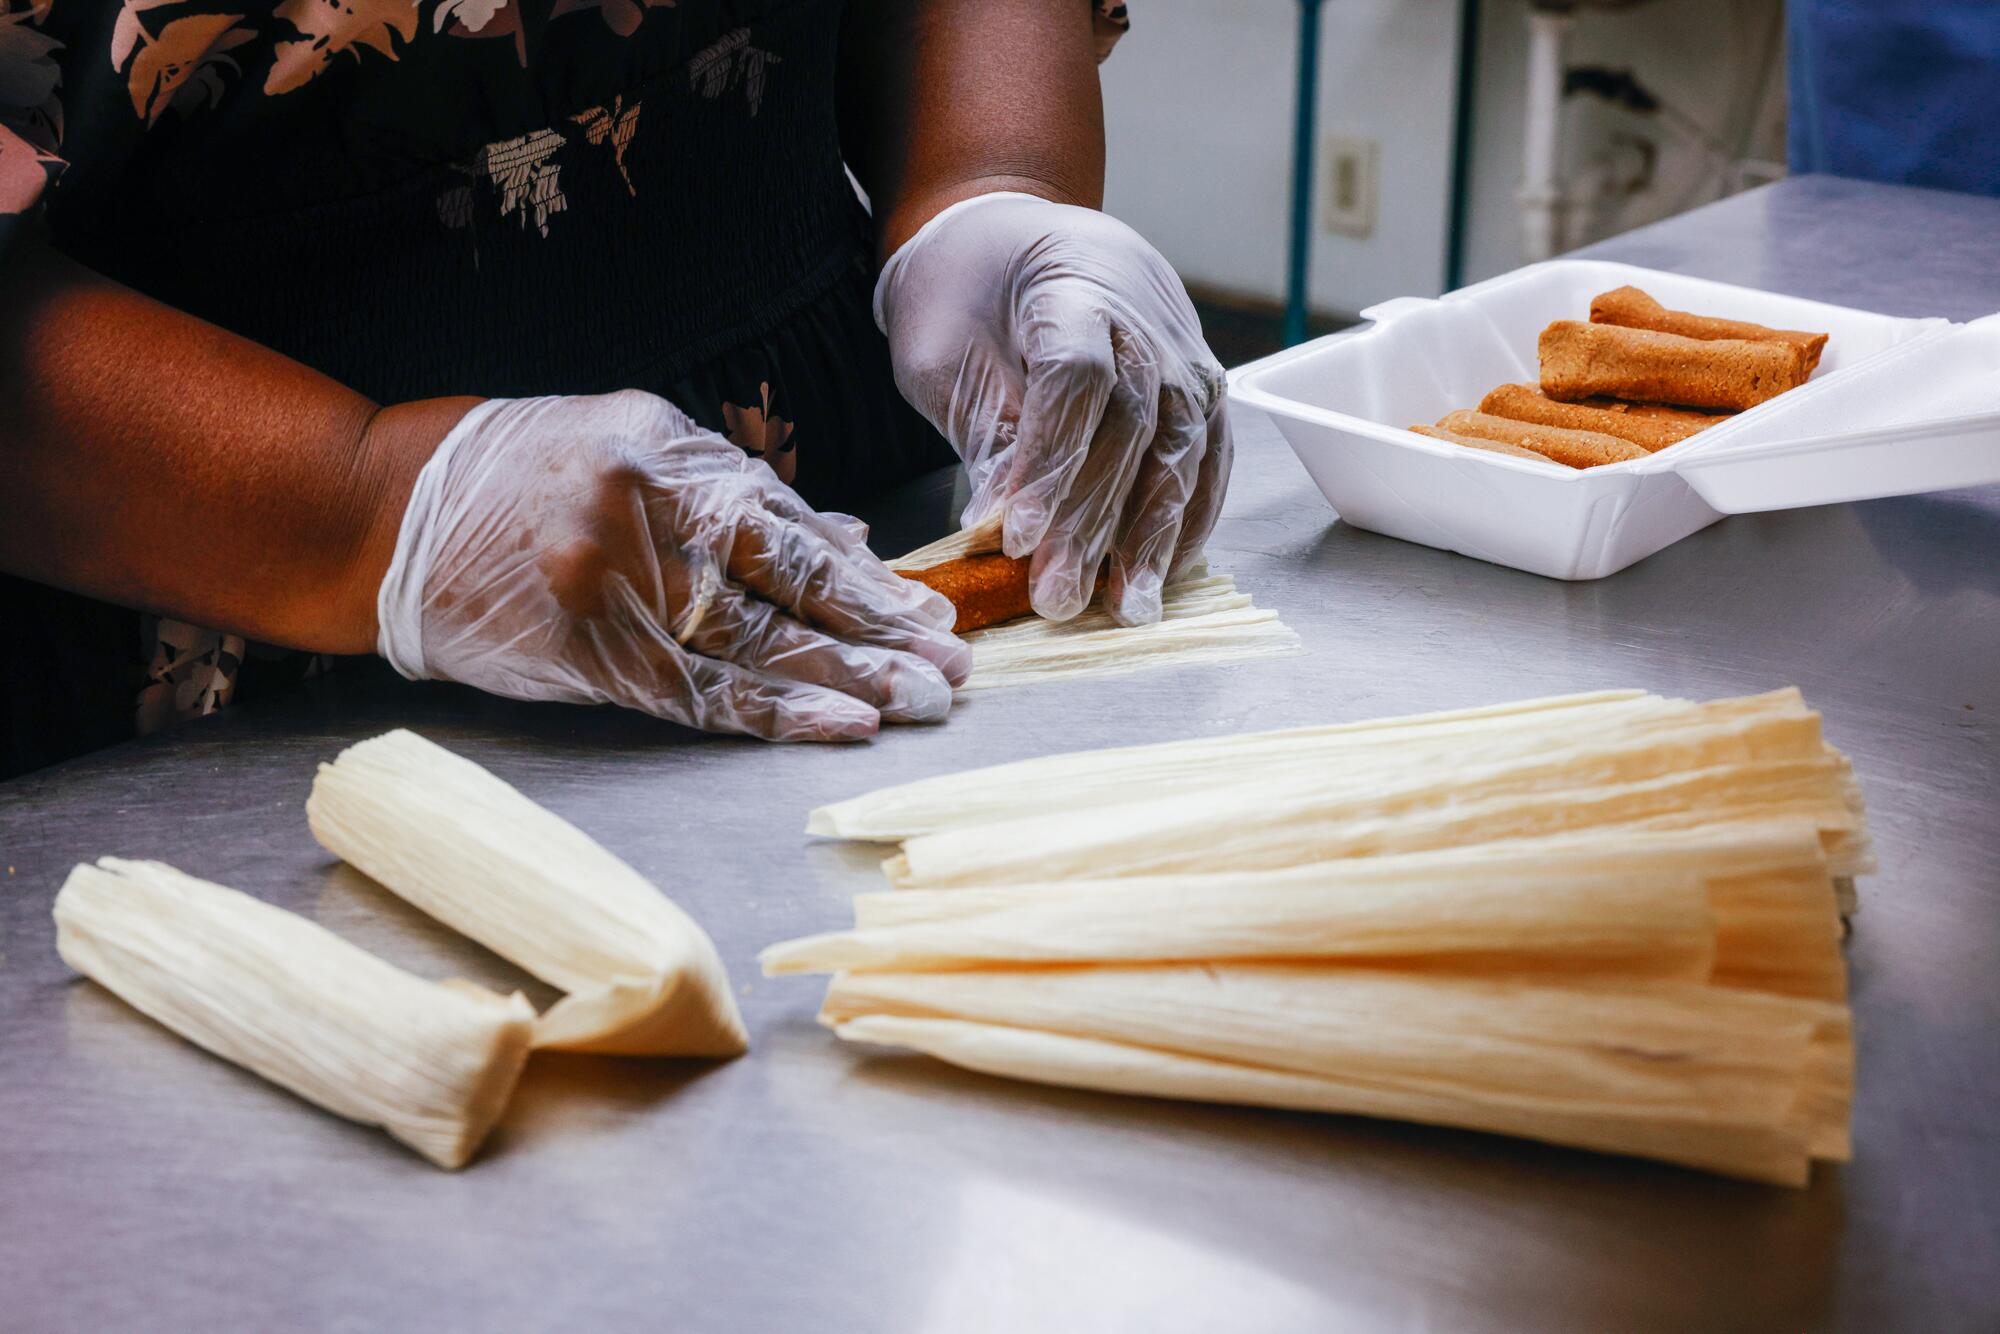 A person wearing gloves on their hands rolls tamales.